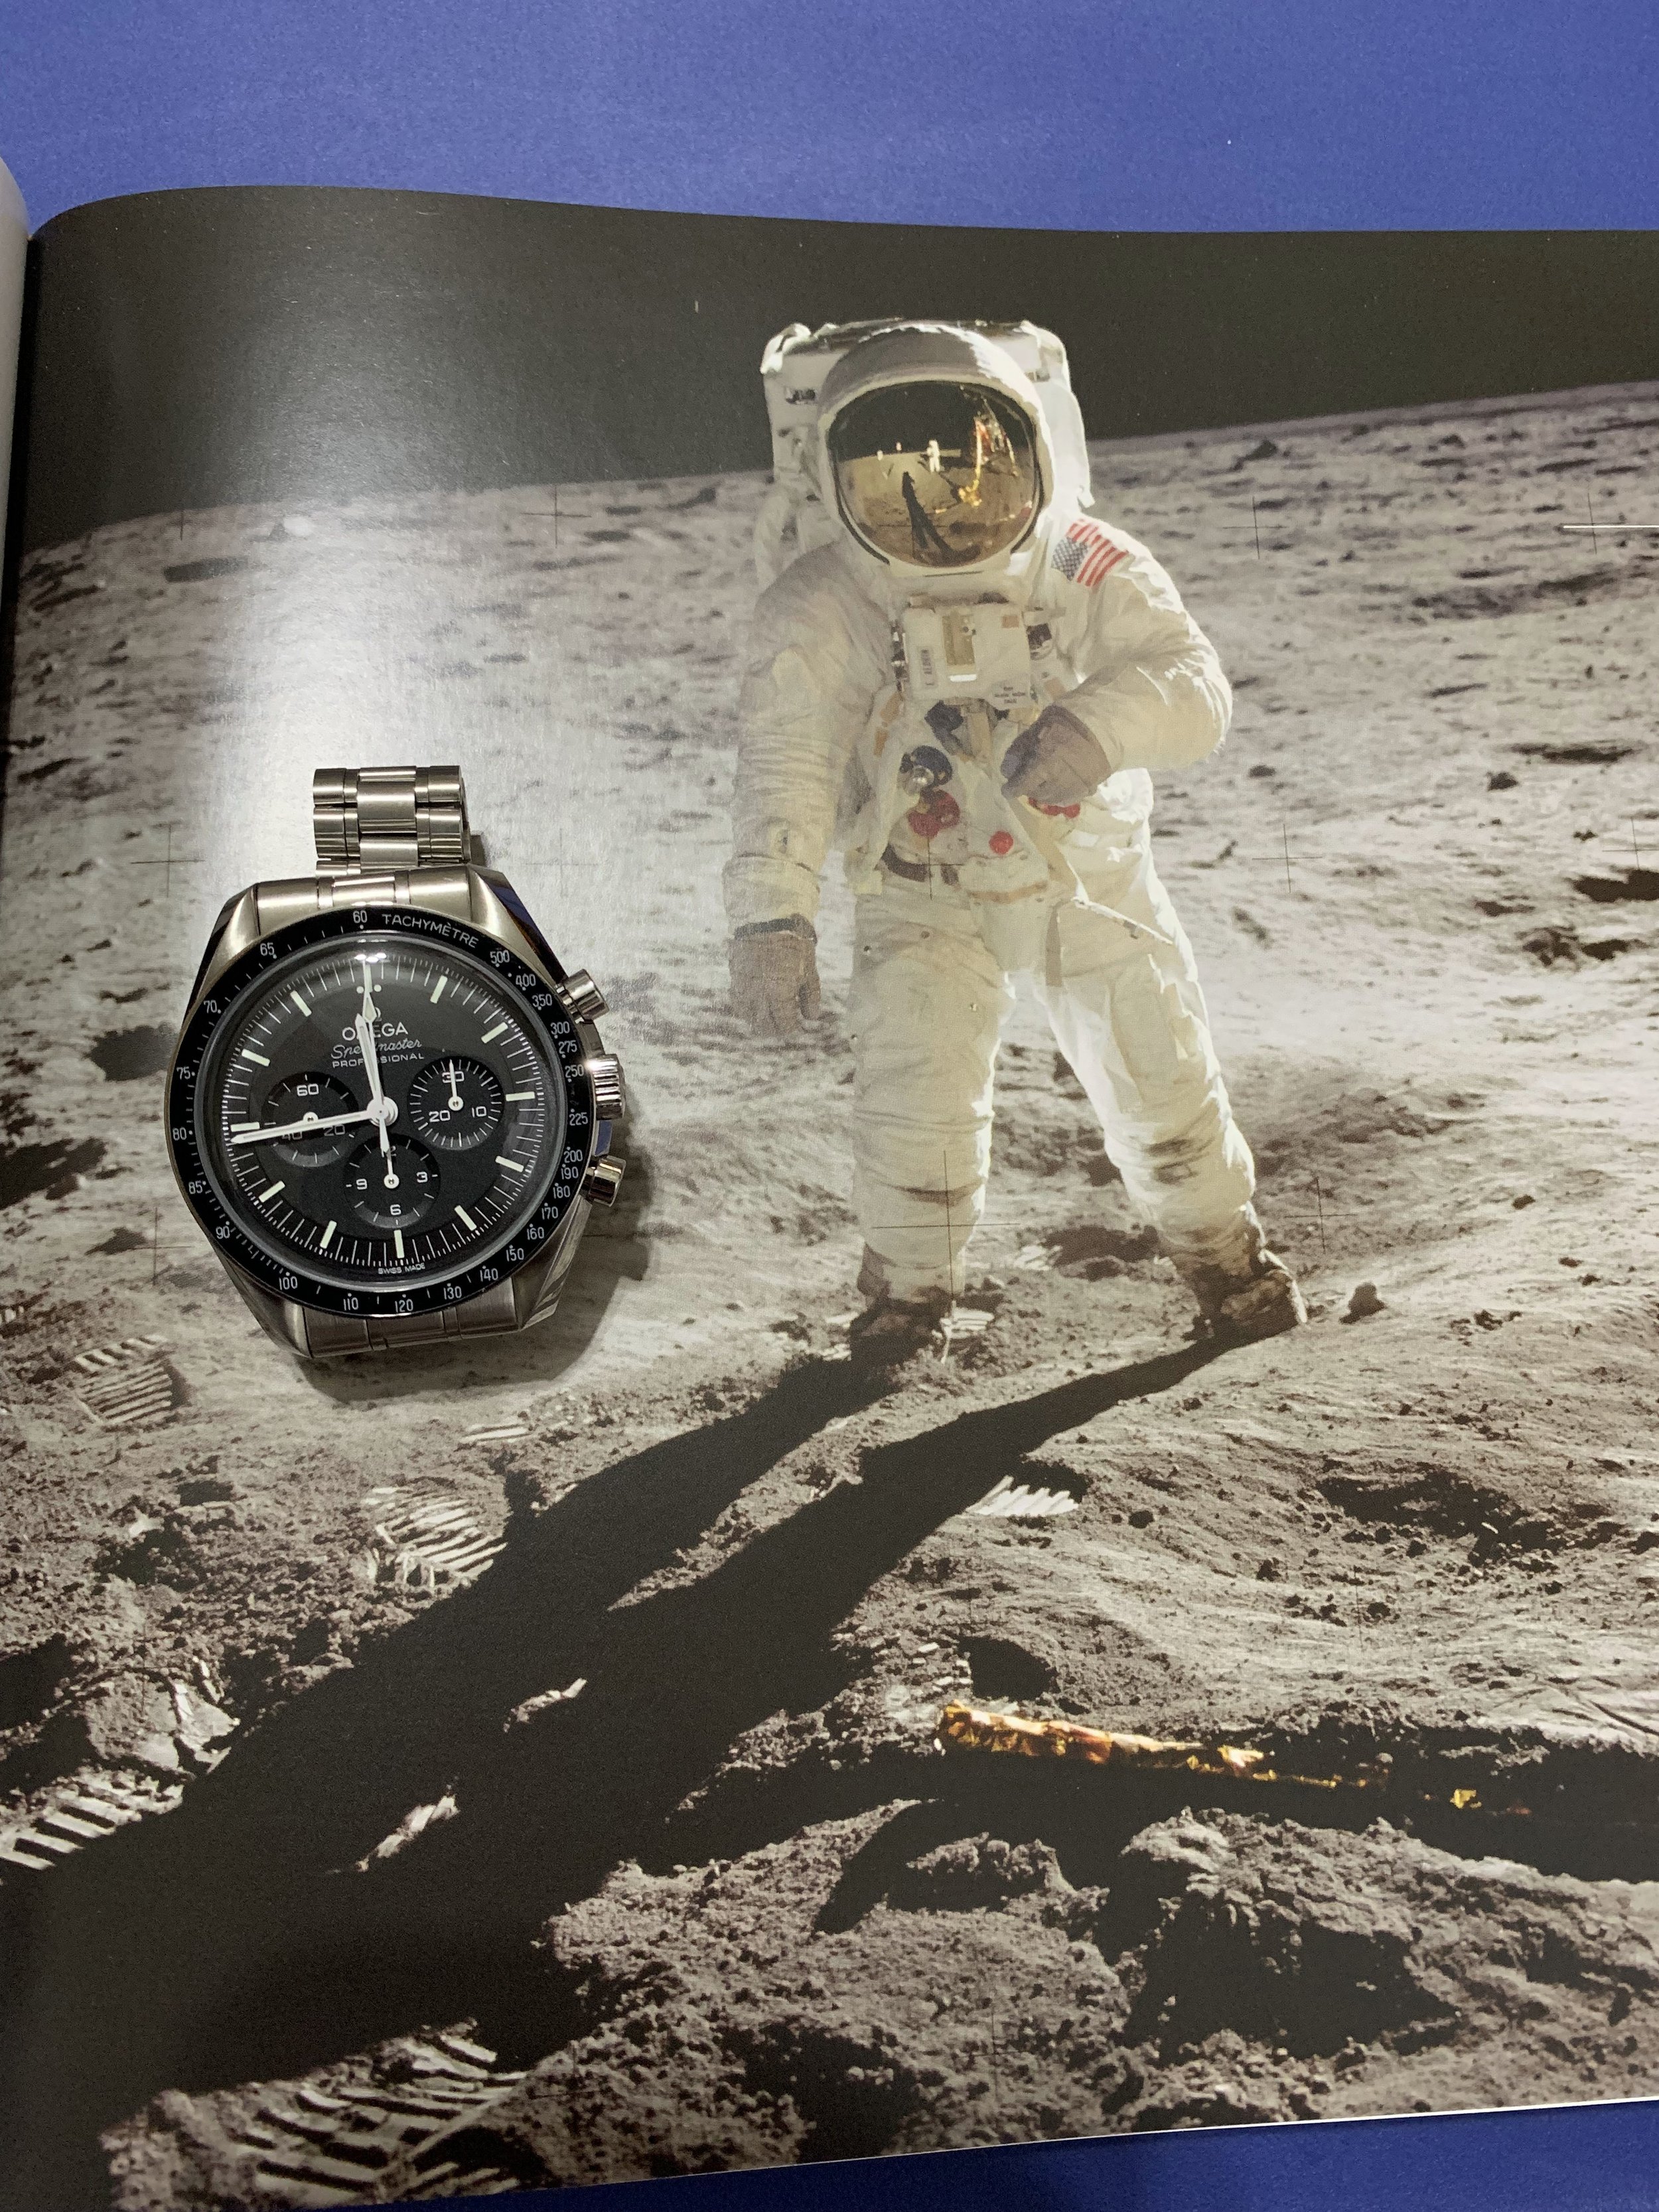 My Speedy next to Buzz Aldrin wearing his on the moon